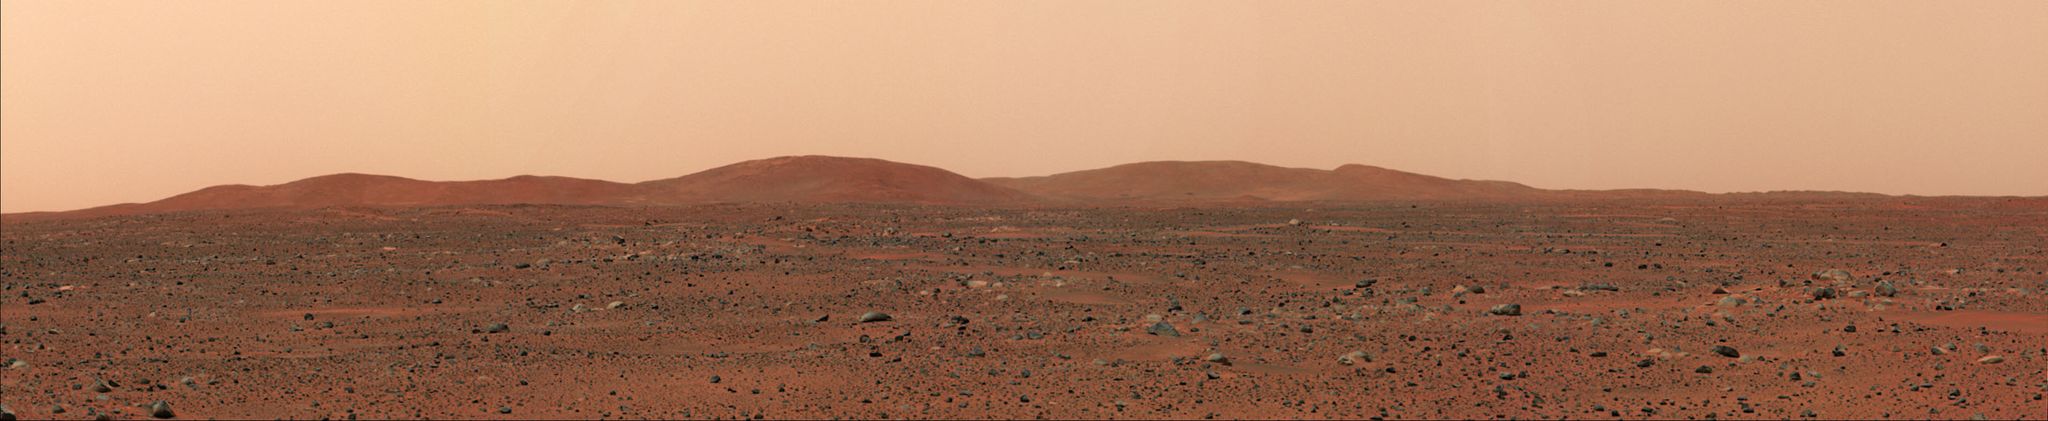  In this handout image released January 13, 2004 by the Jet Propulsion Laboratory in California, the east hills, a potential destination for the rover Spirit, are shown in the distance about 2 to3 kilometers (1 to 2 miles) away. Spirit and an identical rover, Opportunity, scheduled to land on the opposite side of the Red Planet January 24, are part of the $820 million Mars Exploration Rover project.